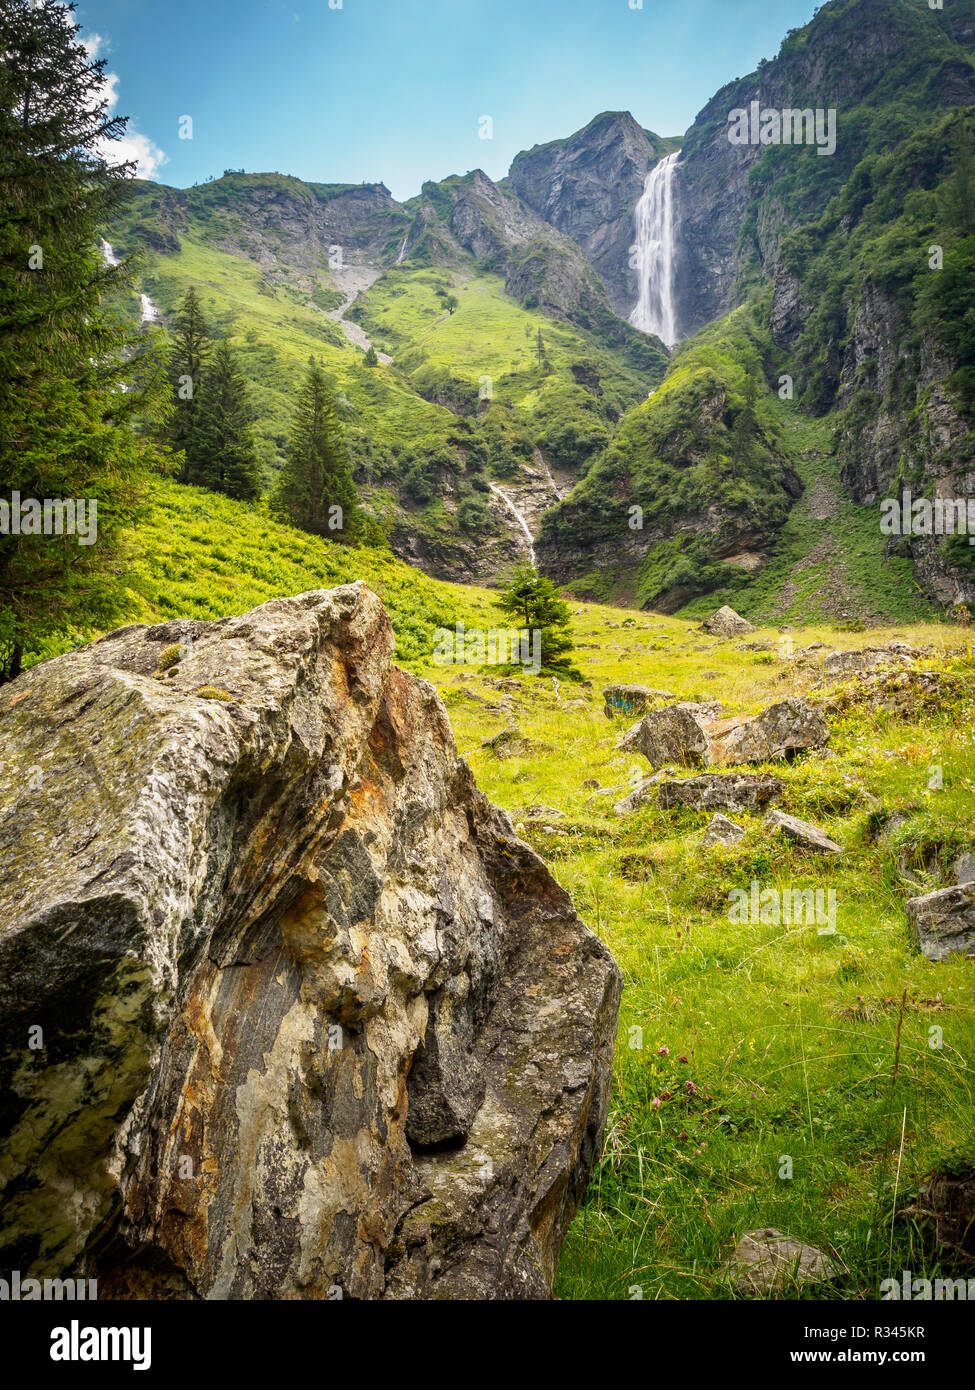 The Schleier waterfall at the Hintersee in Mittersill Salzburg Stock Photo